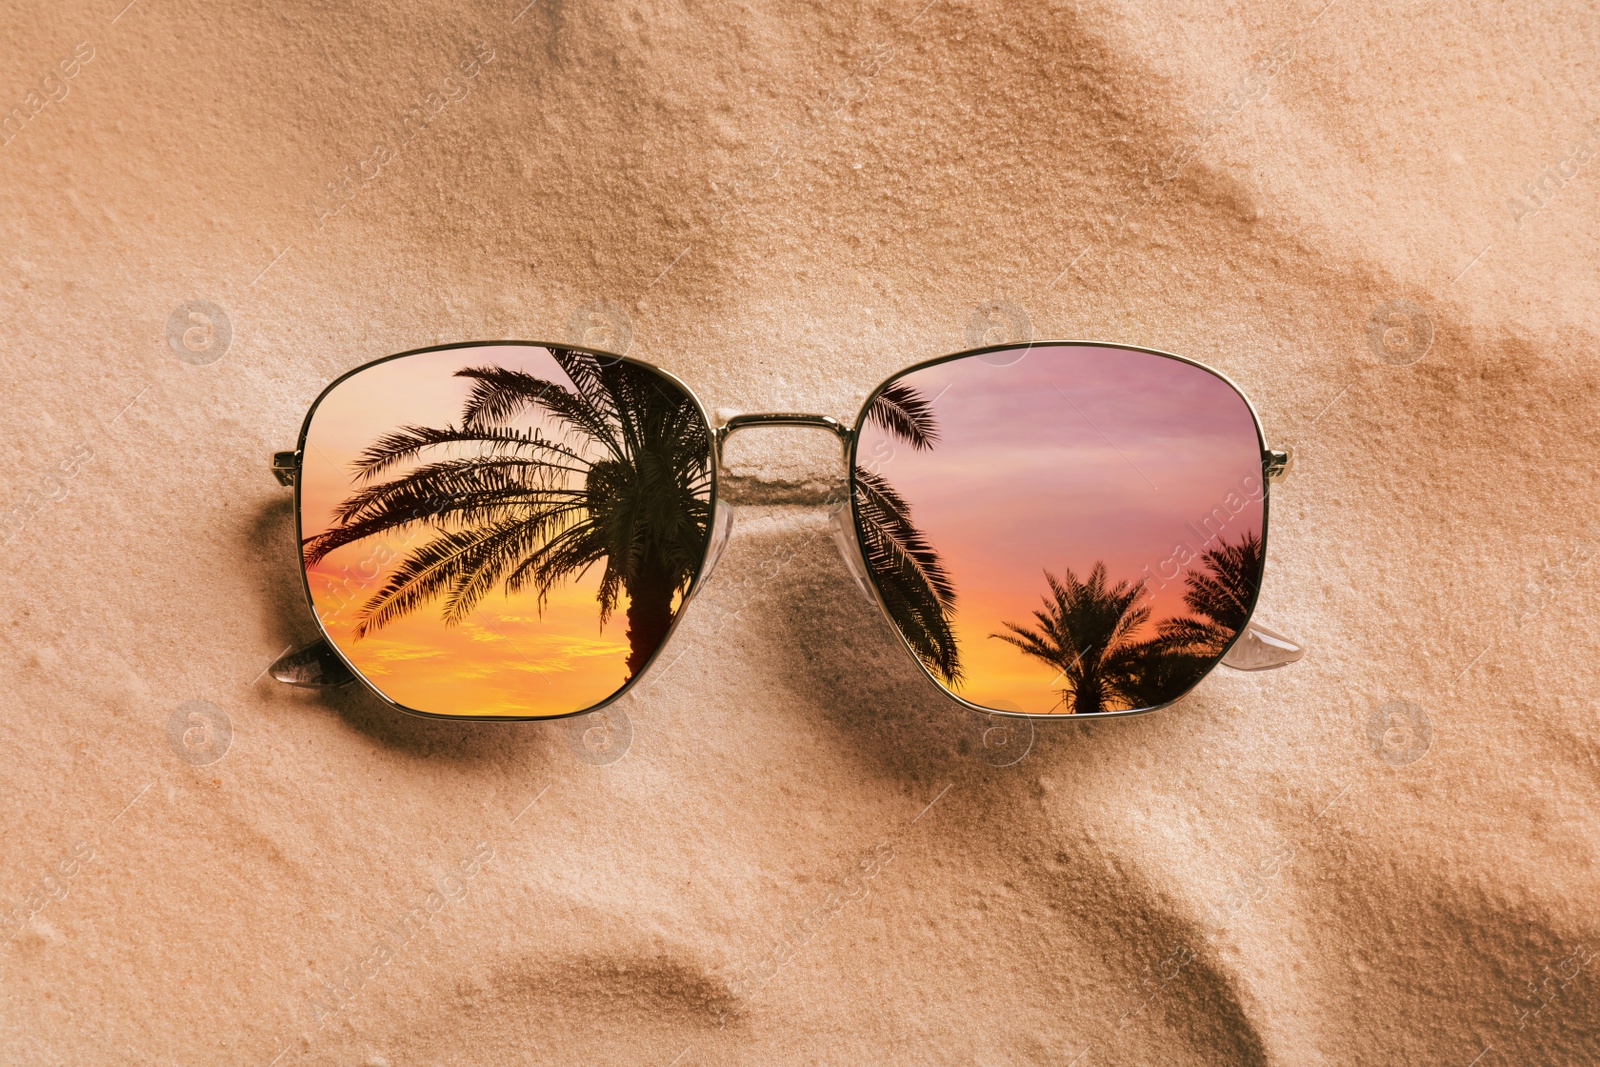 Image of Palms at beautiful sunset mirroring in sunglasses on sandy beach, top view